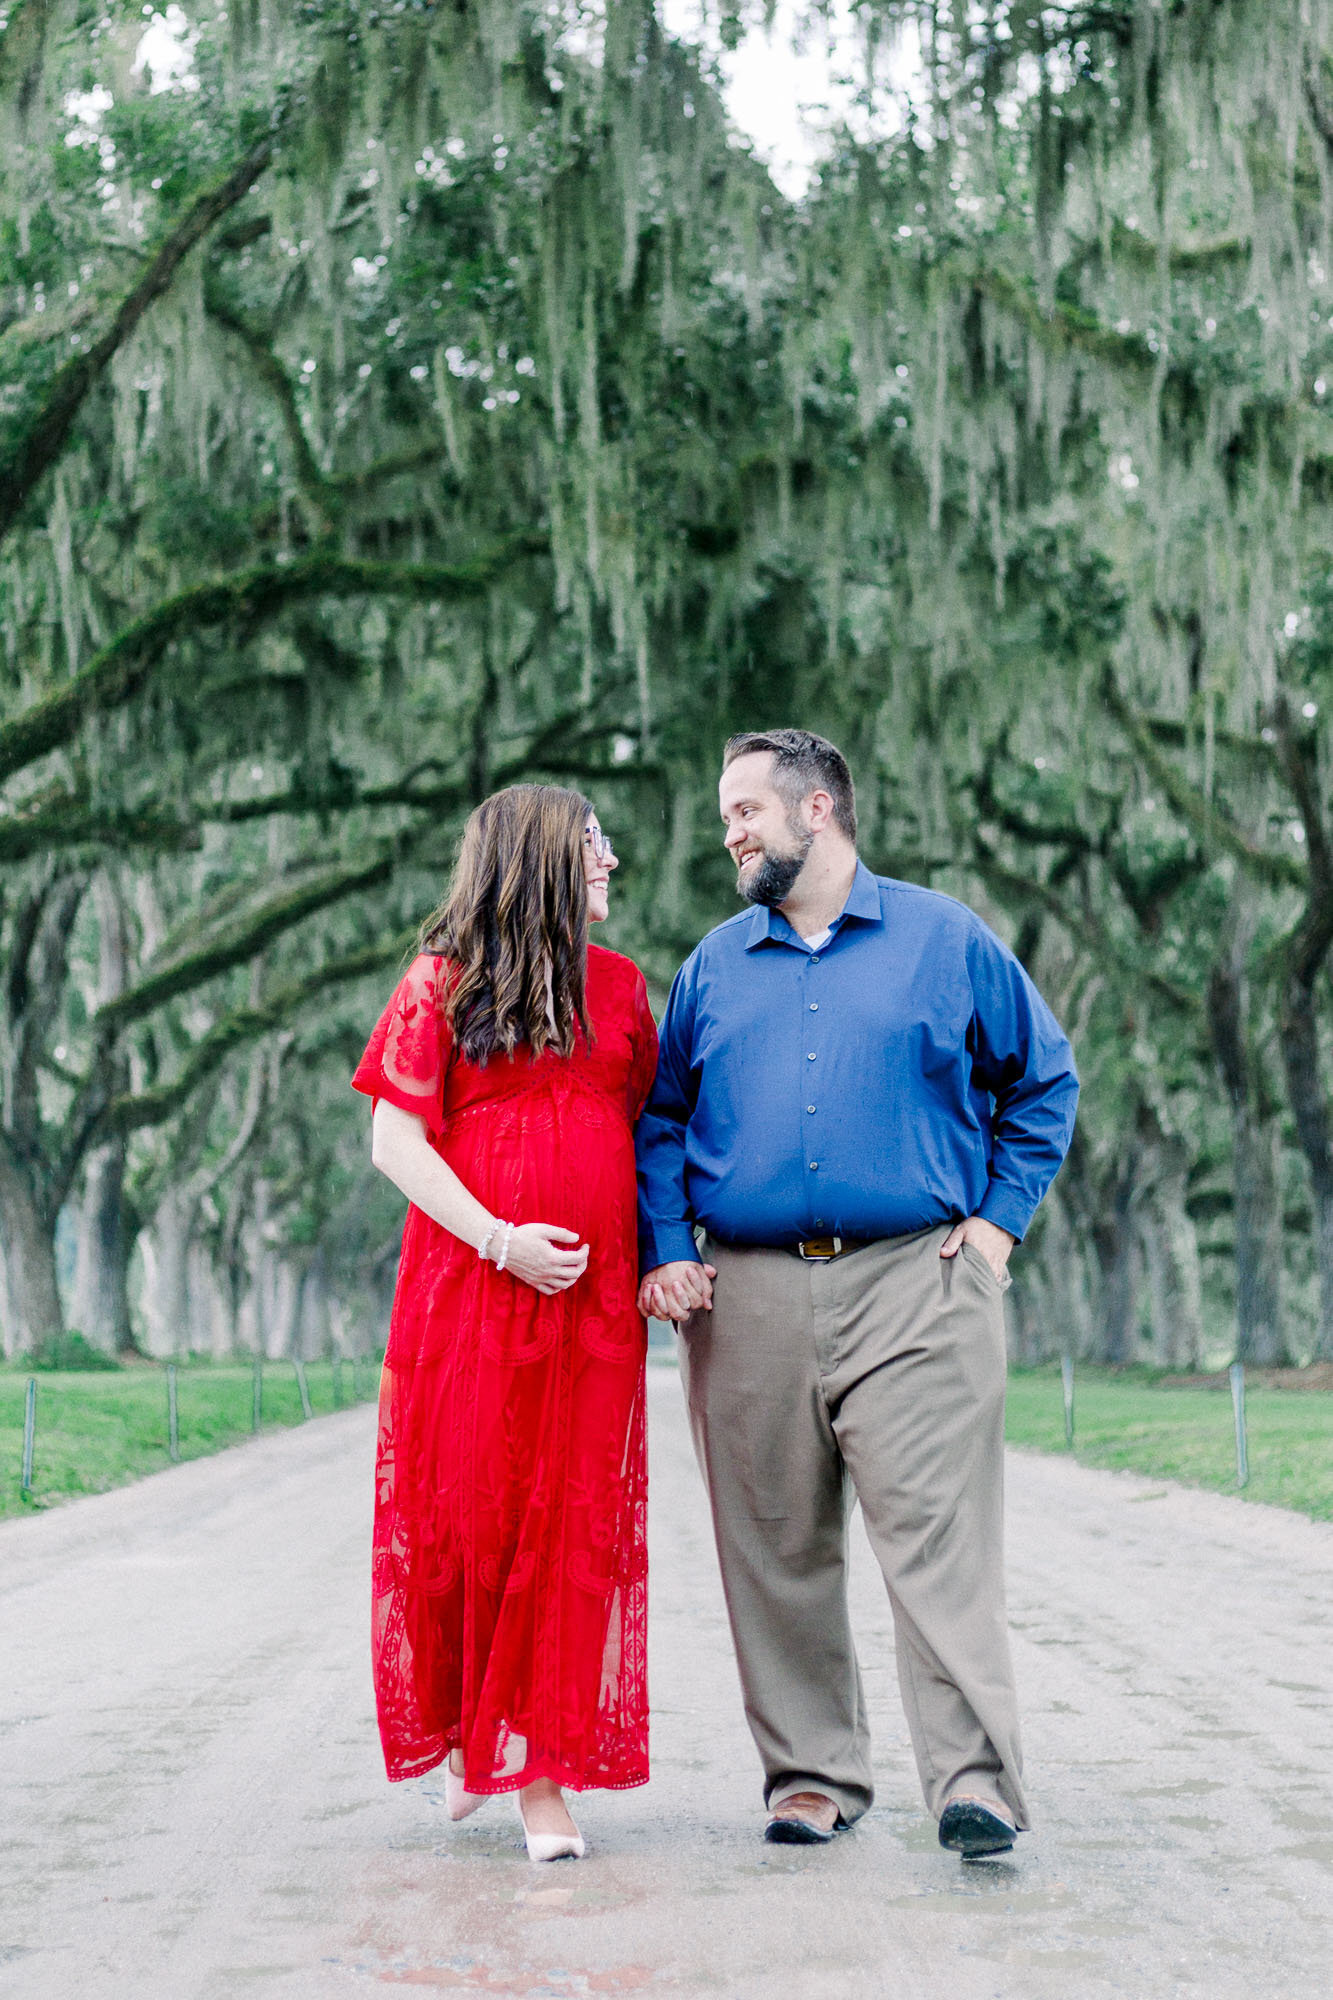 Maternity session captured by Staci Addison Photography